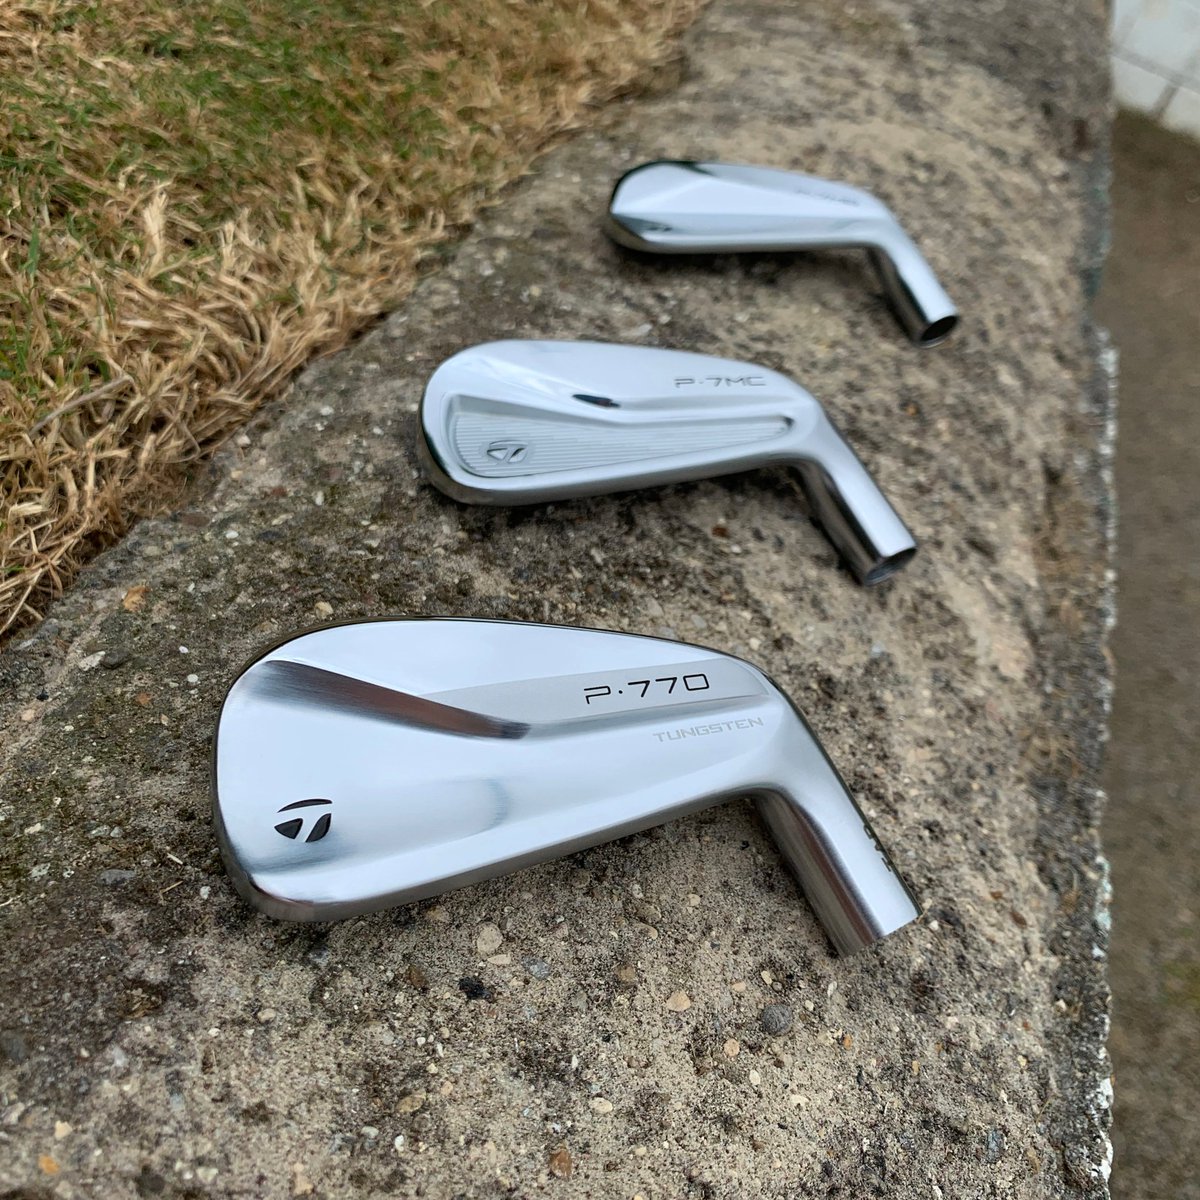 🚨 New Equipment Alert 🚨

@TaylorMadeGolf P·770, P·7MC & P·7MB demo irons in store now.

Full custom fitting available
☎️ 01723 850014 to book.

View Range: bit.ly/30VhggF

@TaylorMadeTour @SnaintonGolf @SnaintonGC #TaylorMade #TaylorMadeGolf #P770 #P7MC #P7MB